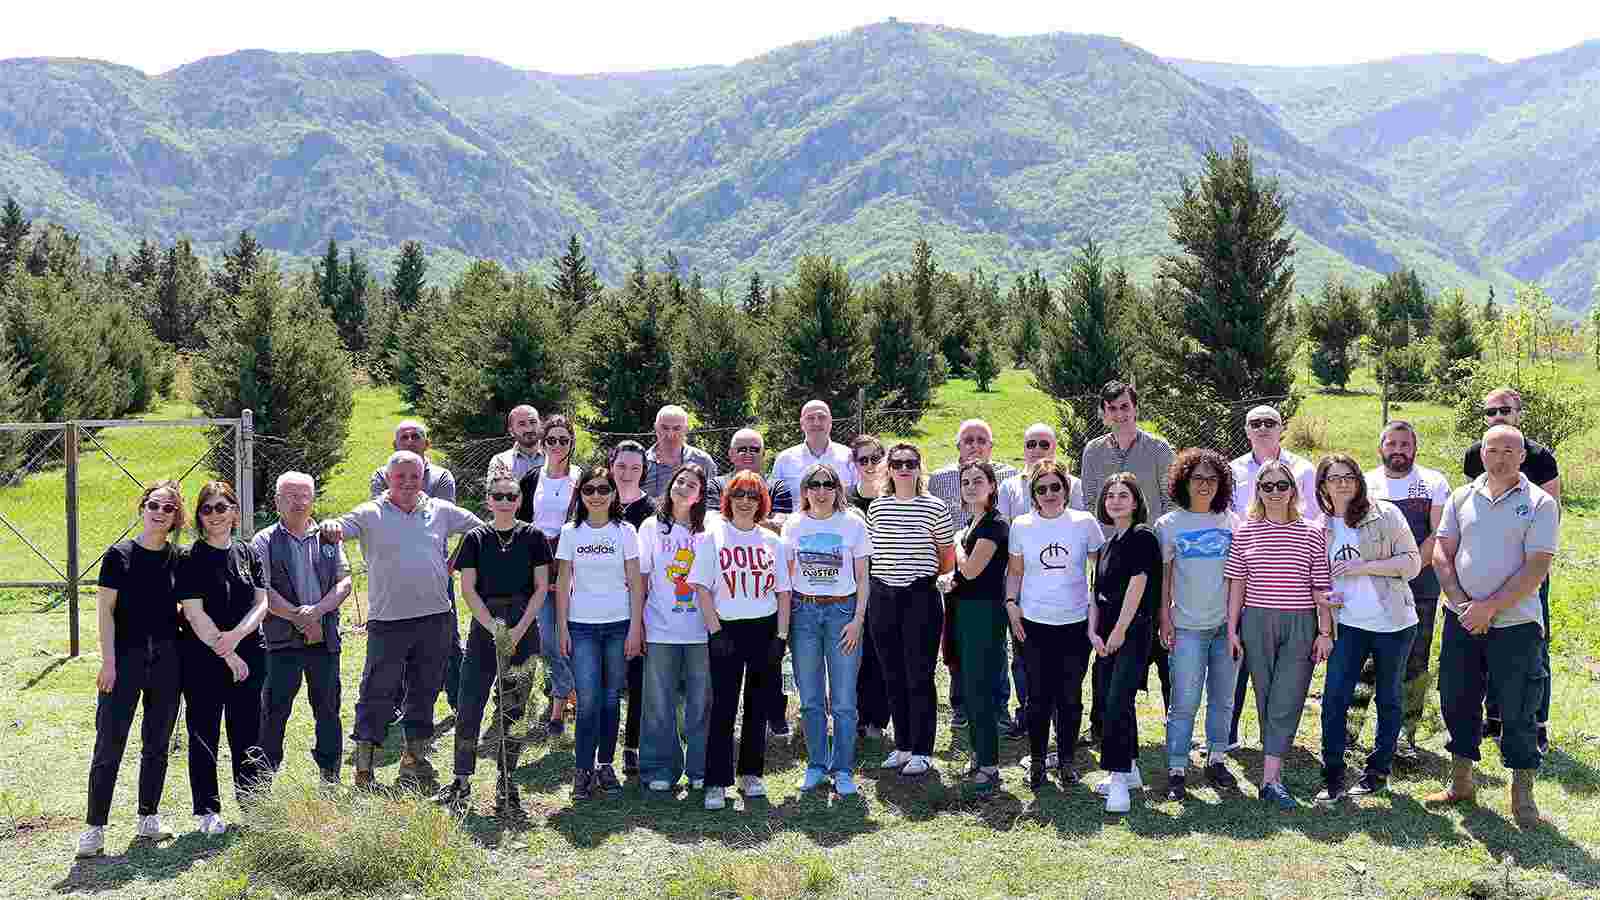 NBG Employees Celebrate Earth Day by Planting Trees and Cleaning Near Mtskheta